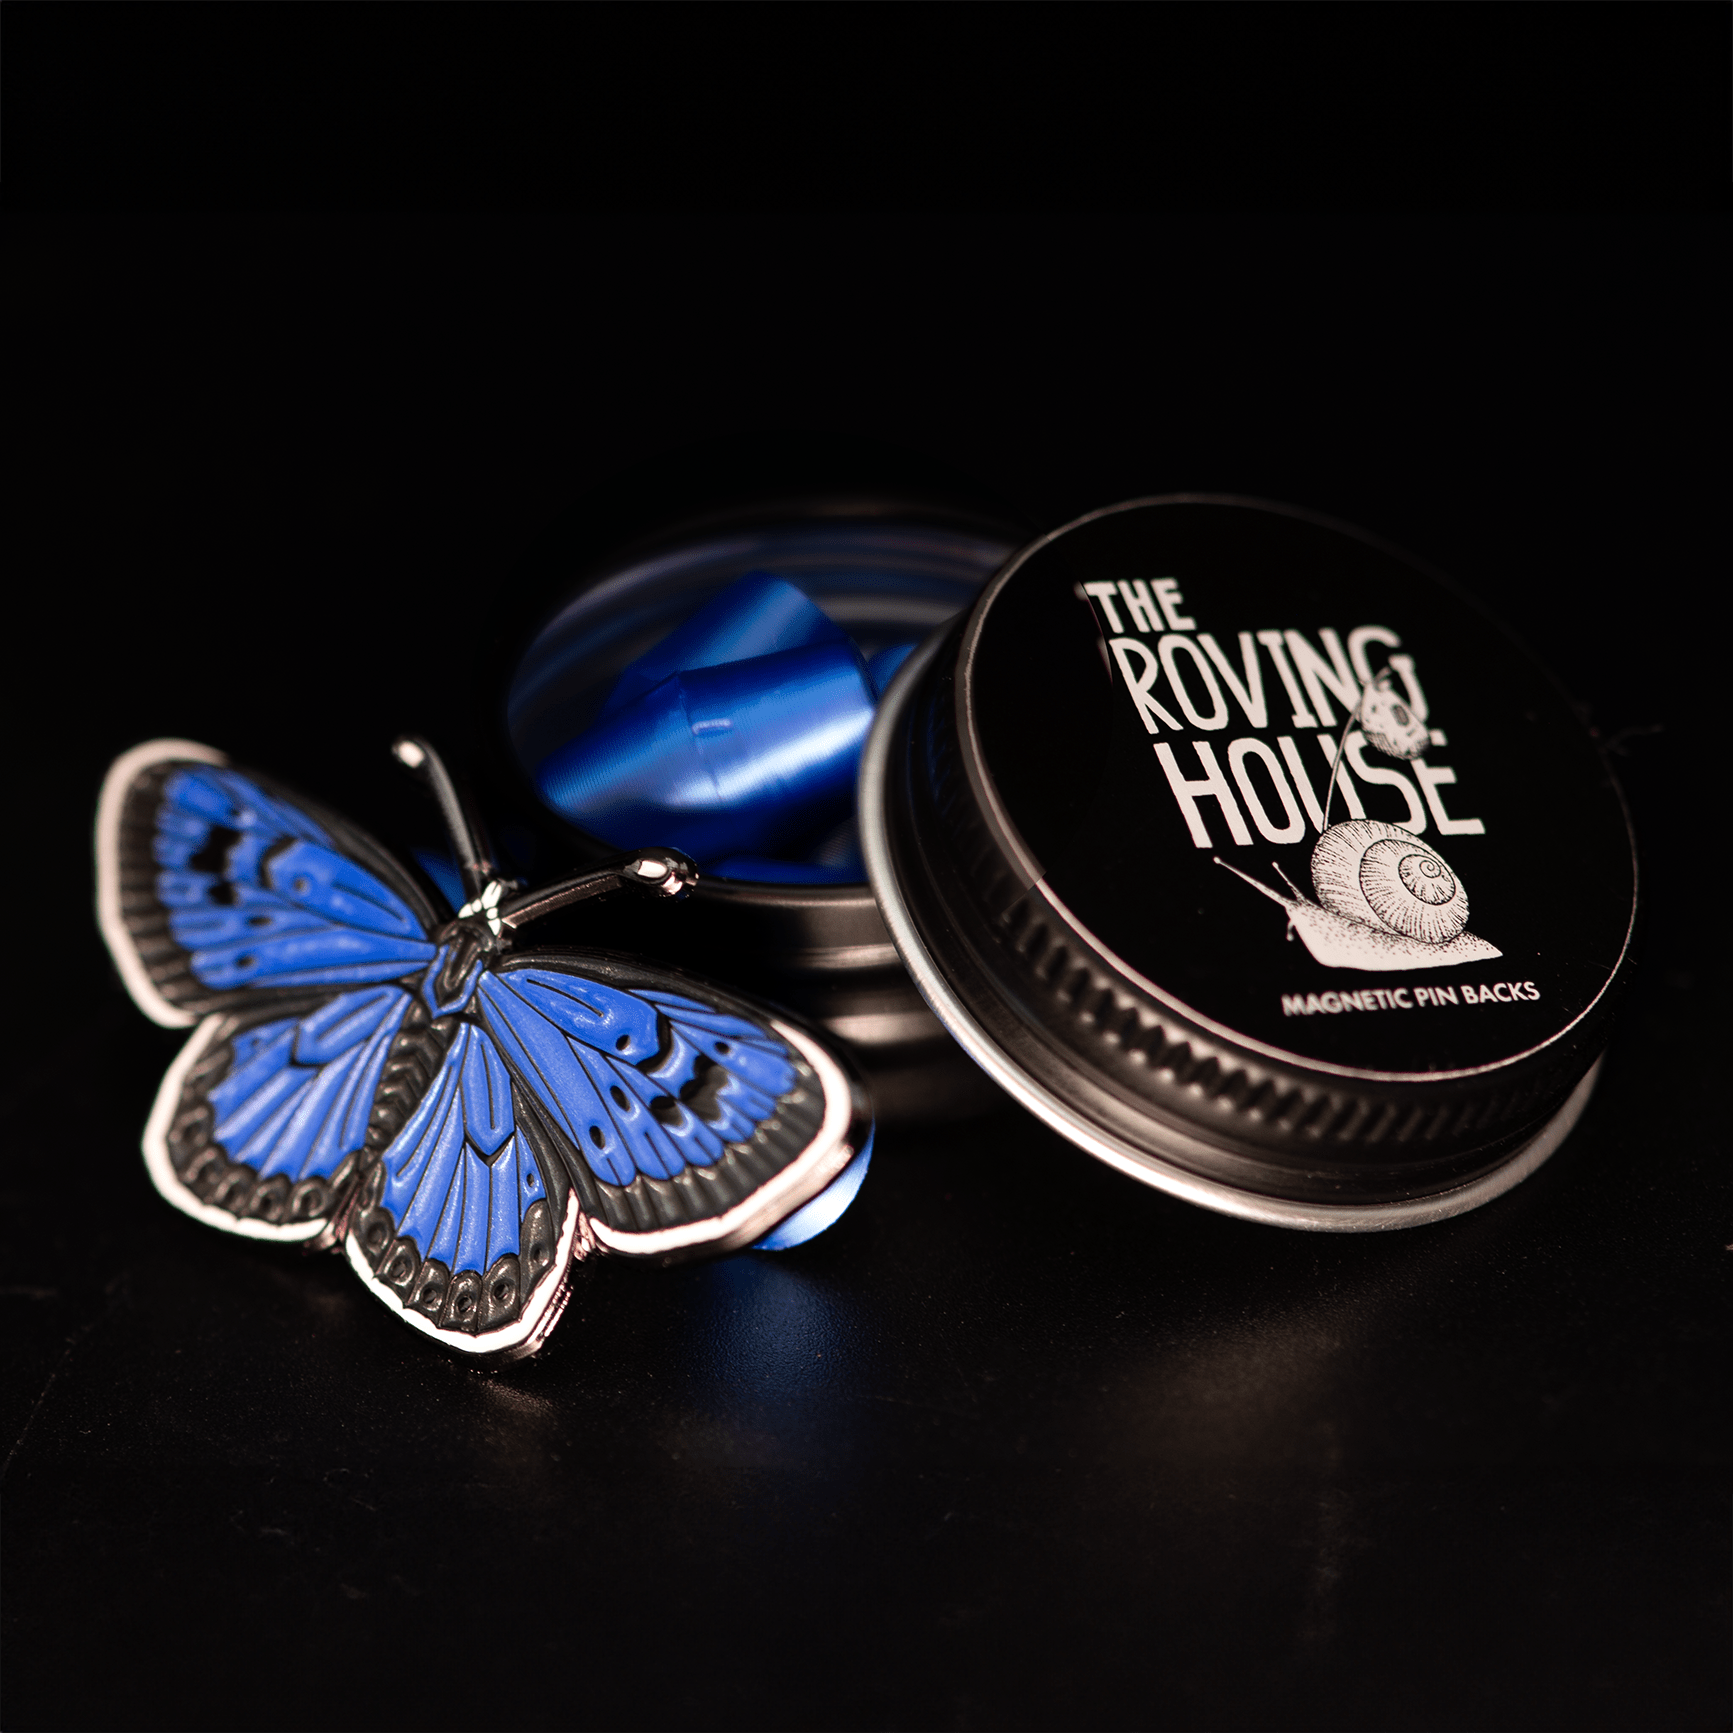 Magnetic Pin Backs for Enamel Pins by The Roving House